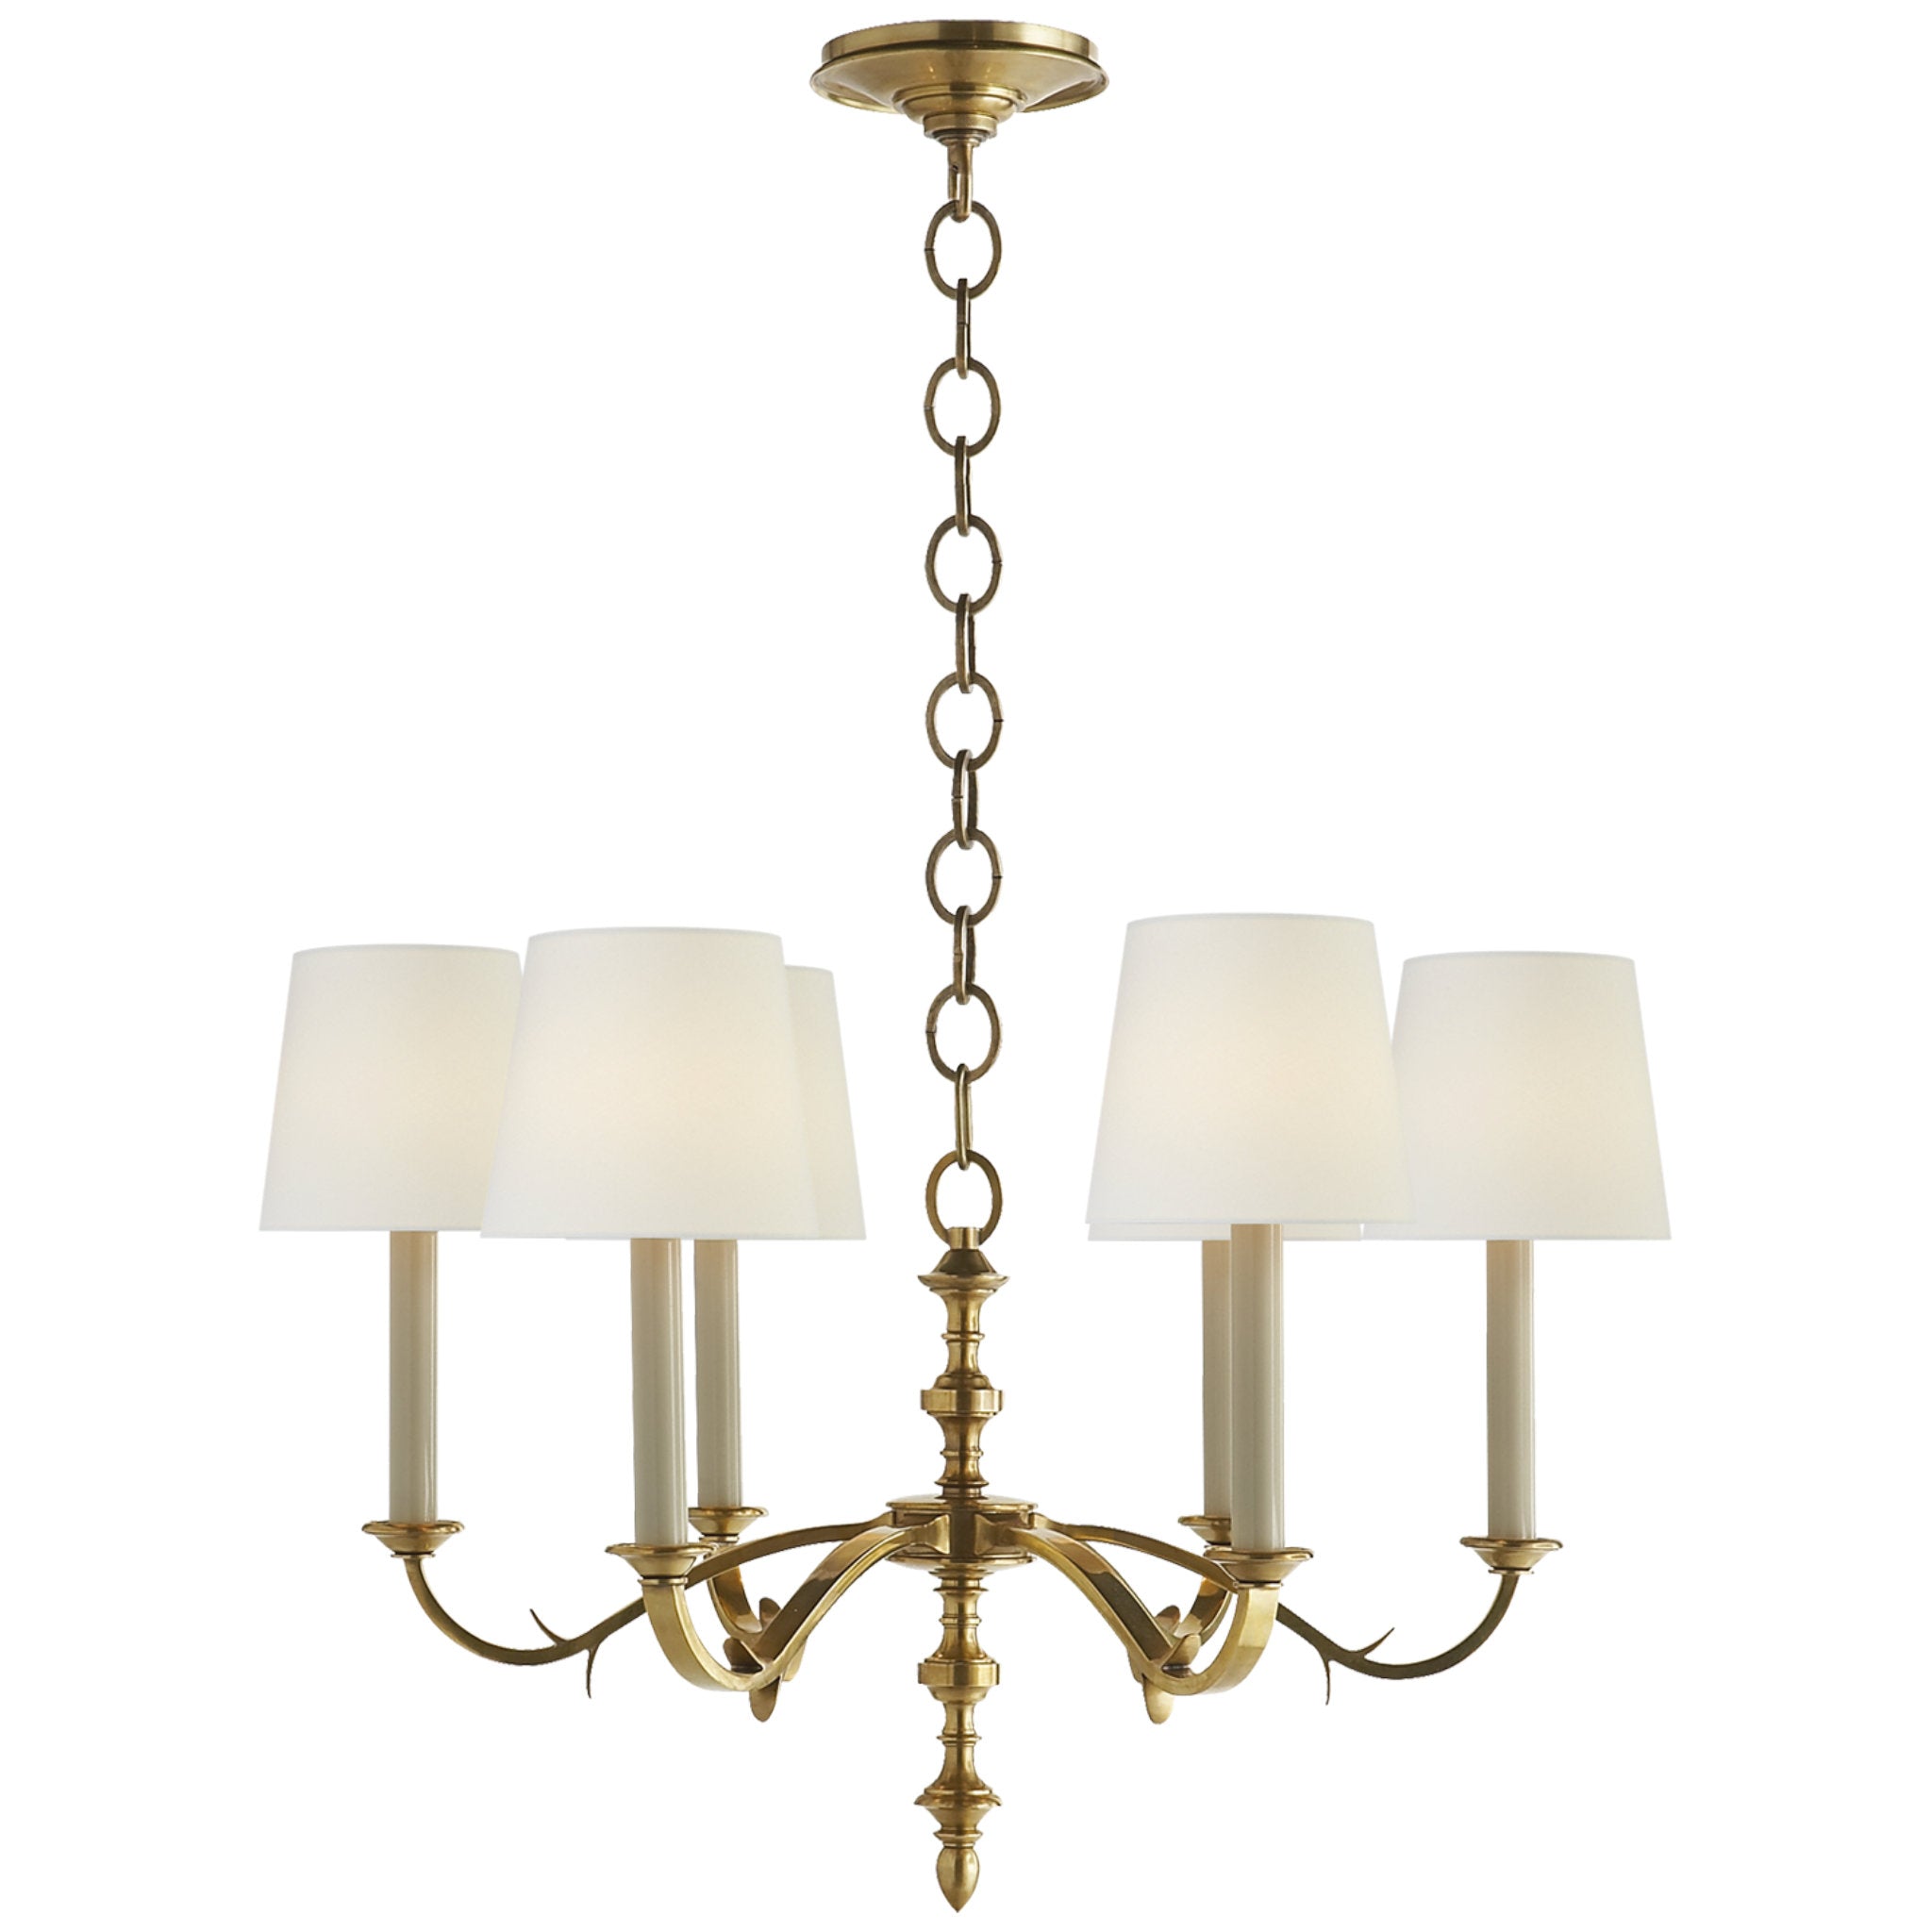 ARN5262HABCG by Visual Comfort - Turenne Large Dynamic Chandelier in  Hand-Rubbed Antique Brass with Clear Glass